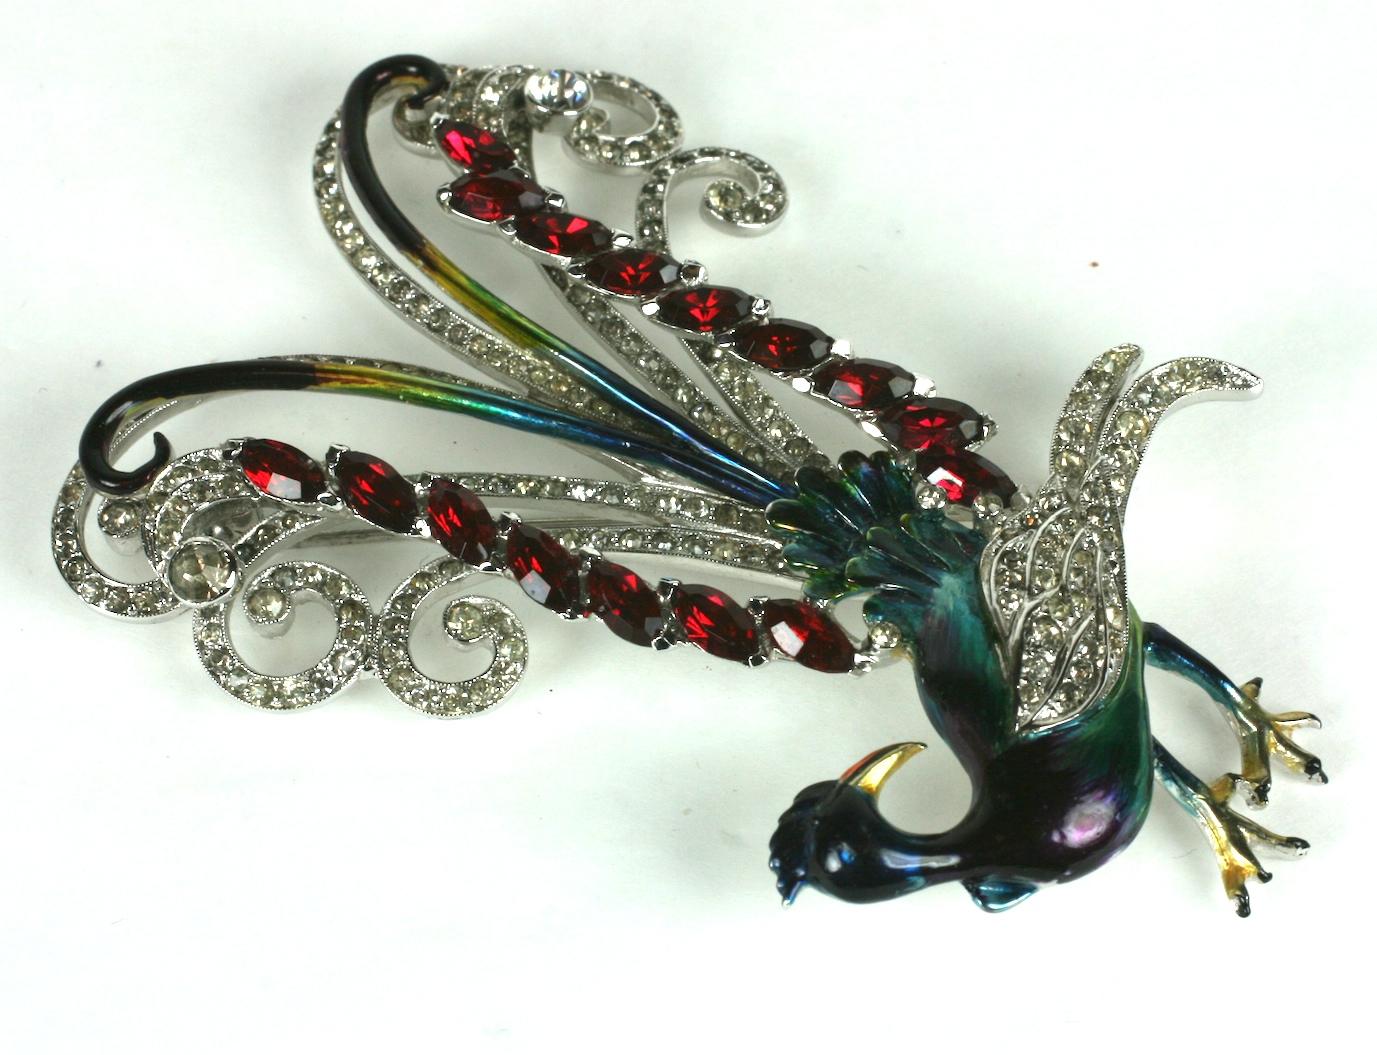 Rare Art Deco Coro Lyre Bird brooch of pastes and ombre technicolor enamels from the 1940's. The elegant bird is decorated with vibrant, original enamels along with the elaborate pave work and faux ruby marquises. 
Amazing design and condition from